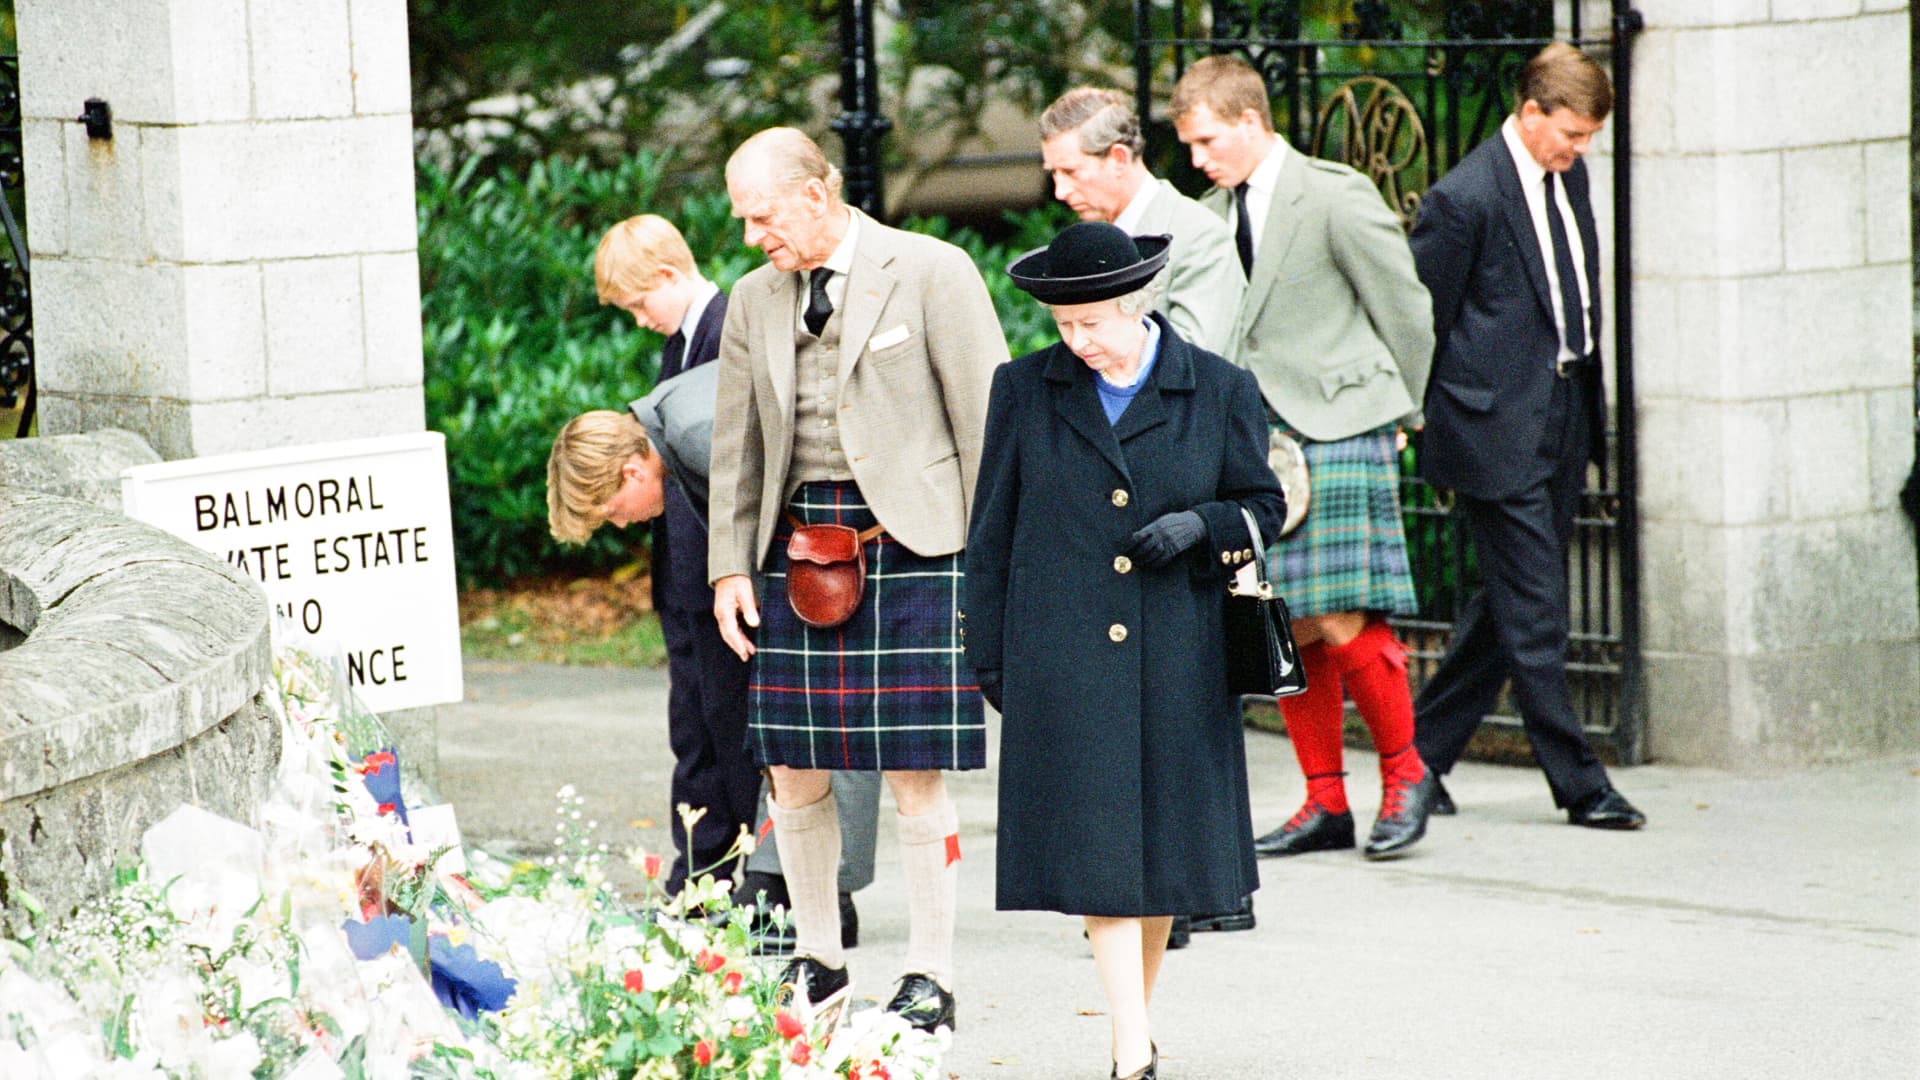 Royal Family, Balmoral Estate, Scotland, 5th September 1997. After attending a private service at Crathie Church, Royal family stop to look at floral tributes left for Princess Diana, at the gates of Balmoral Castle. They are: Queen Elizabeth II, Prince Philip, Prince Charles, Prince William, Prince Harry, Peter Phillips.